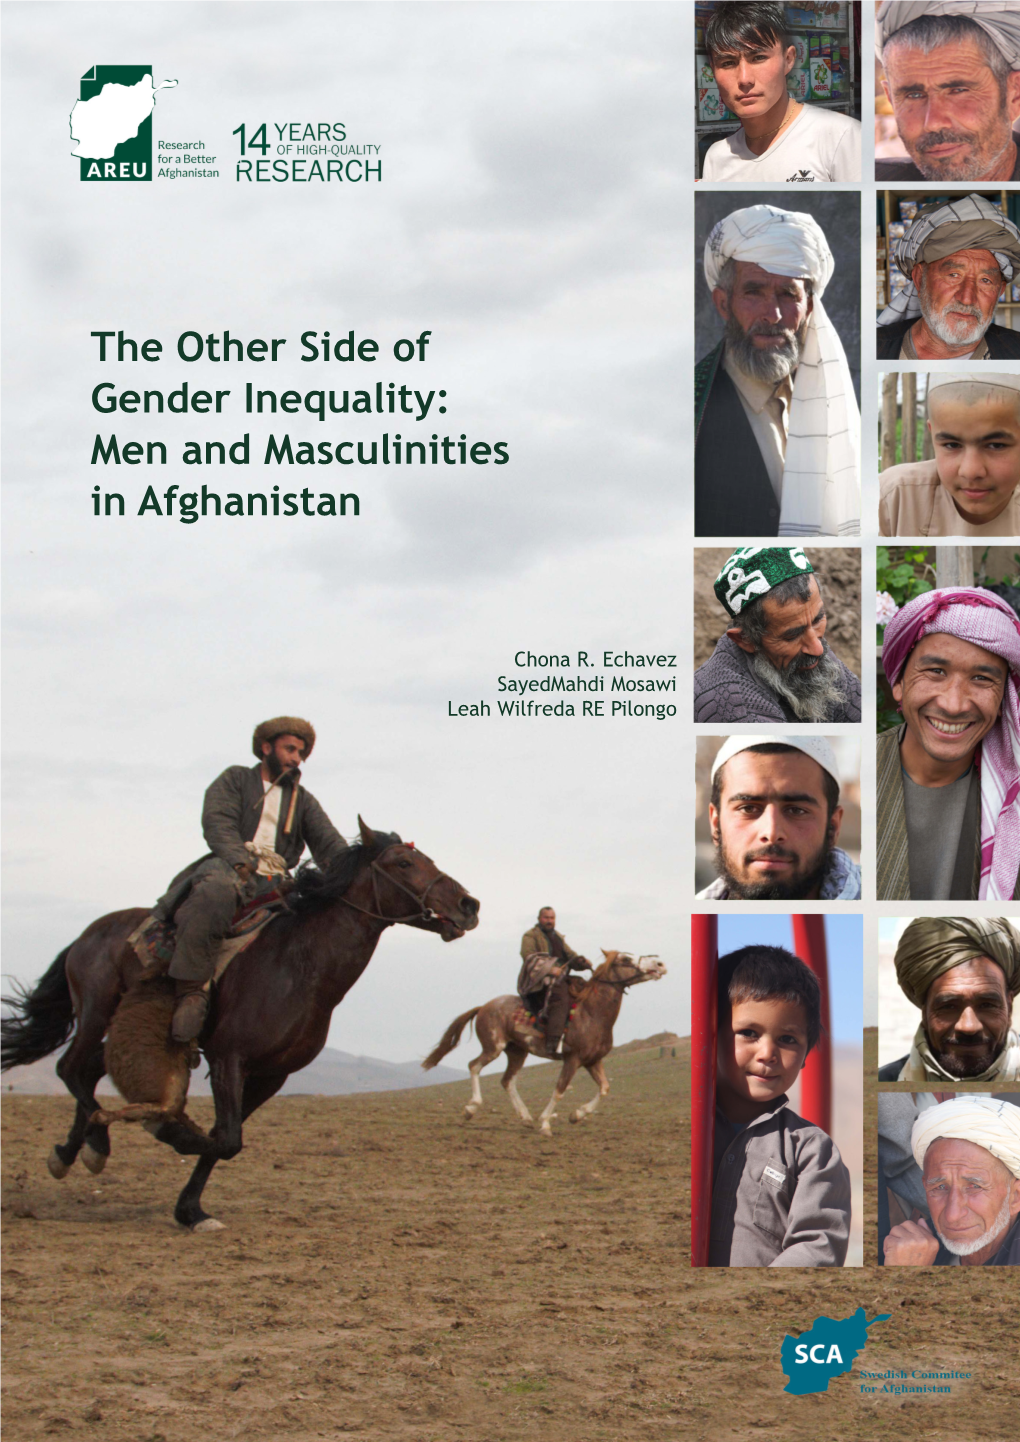 The Other Side of Gender Inequality: Men and Masculinities in Afghanistan